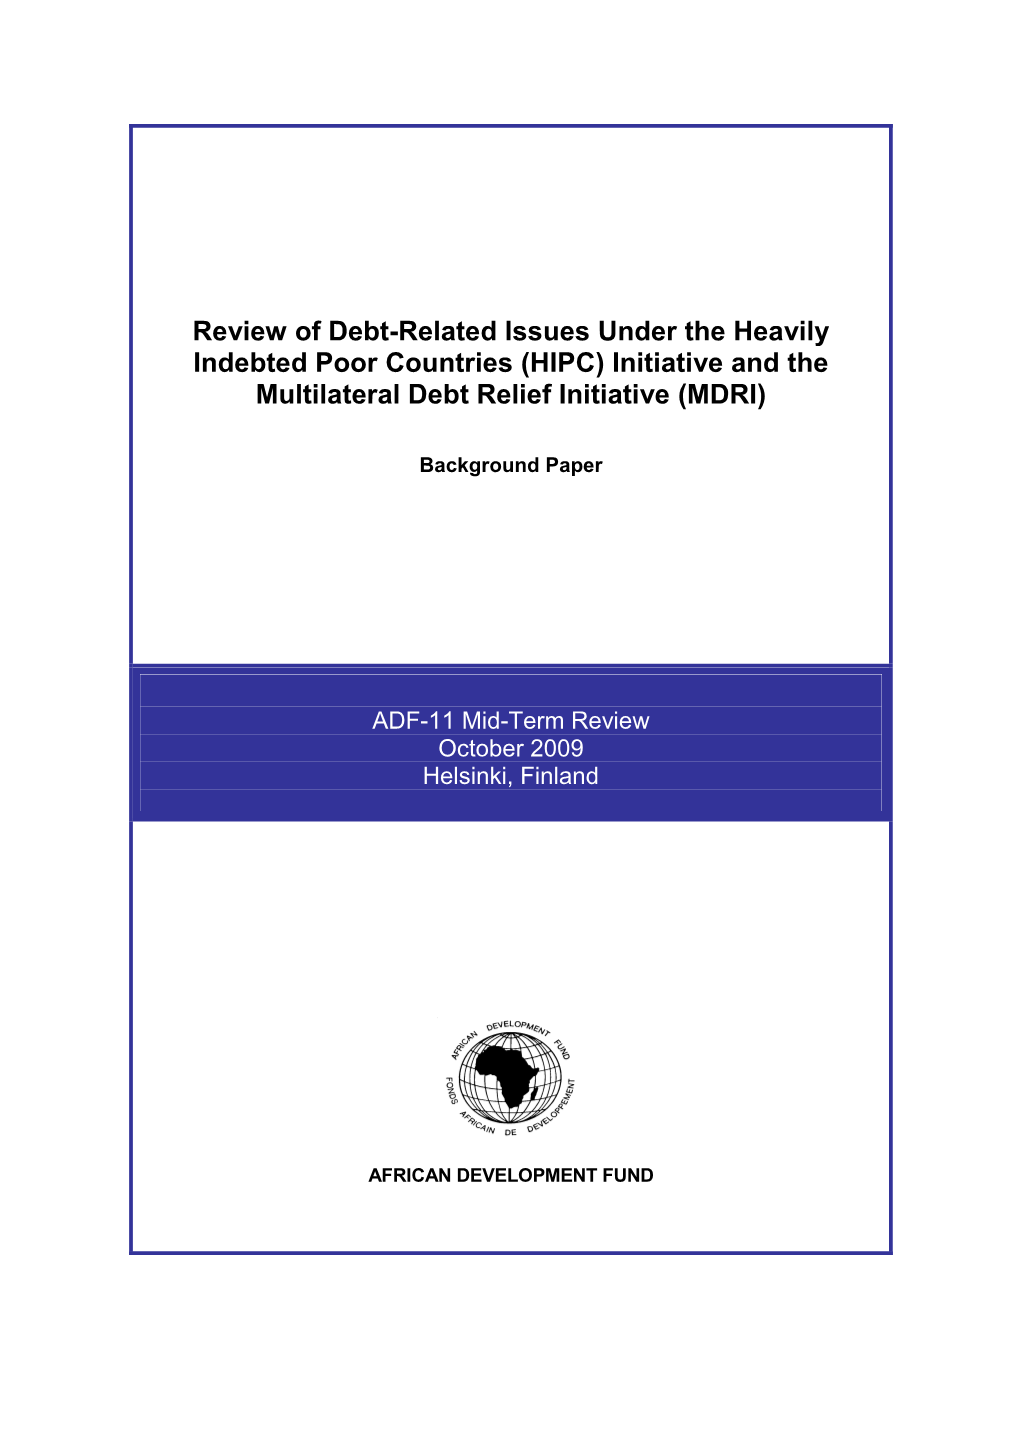 Review of Debt-Related Issues Under the HIPC Initiative and the MDRI